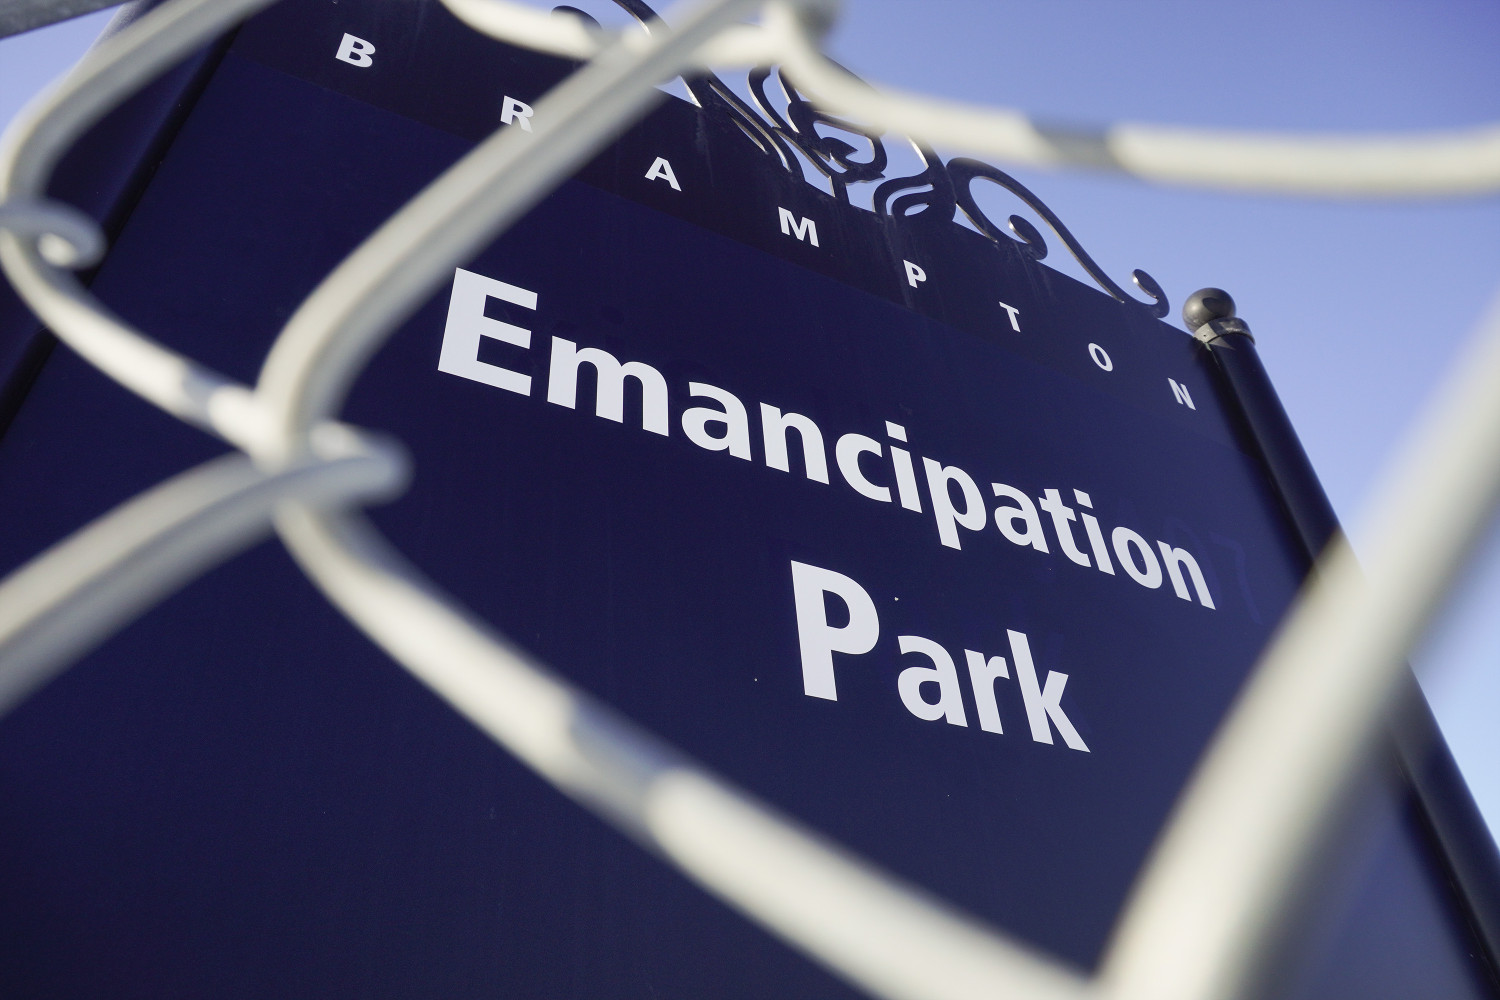 After Rowena Santos refused to support improvements to Brampton’s Emancipation Park, Black community expresses disappointment